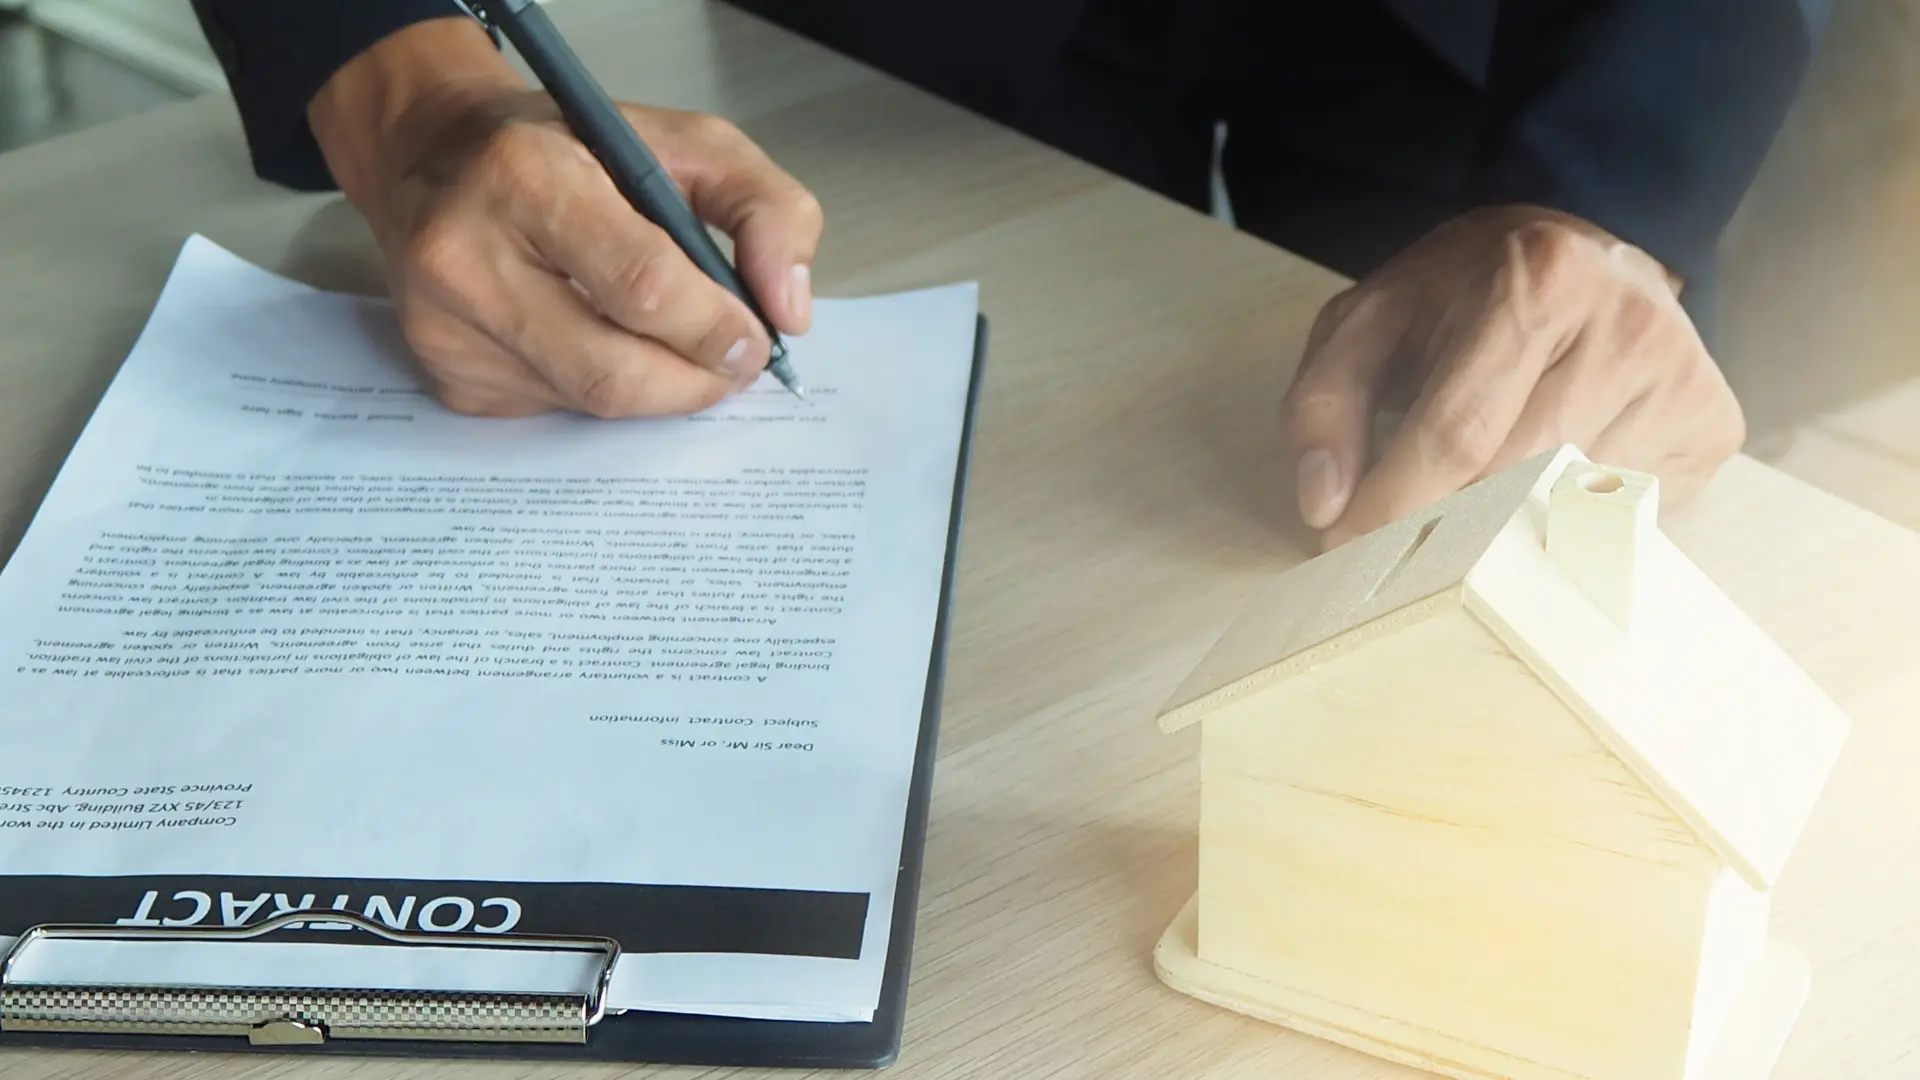 REGISTRATION AND NOTARIZATION OF LEASES IN THE UAE